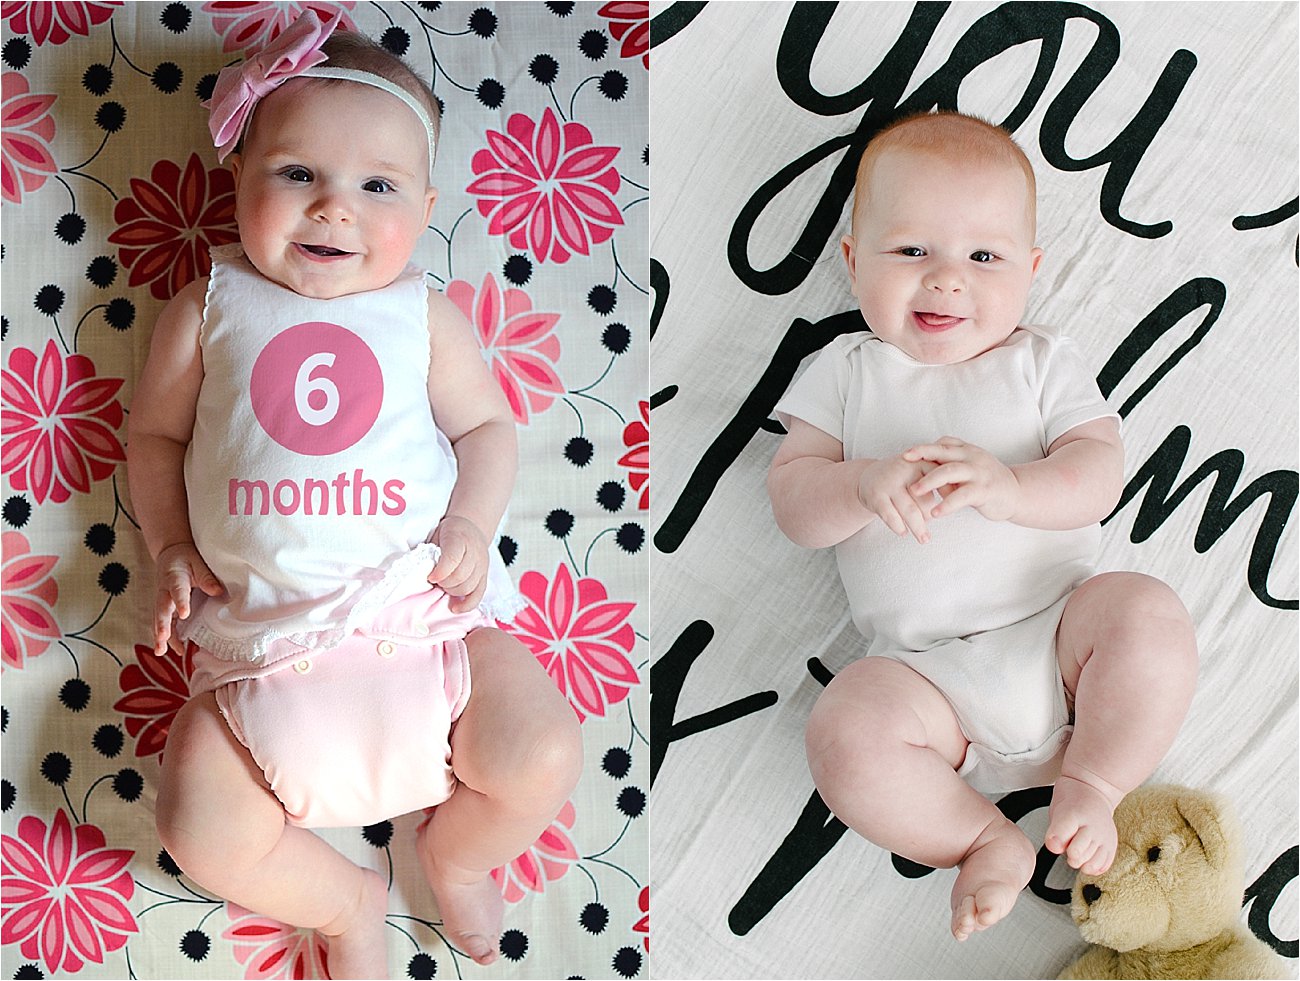 lilly-six-month-update_2316-1